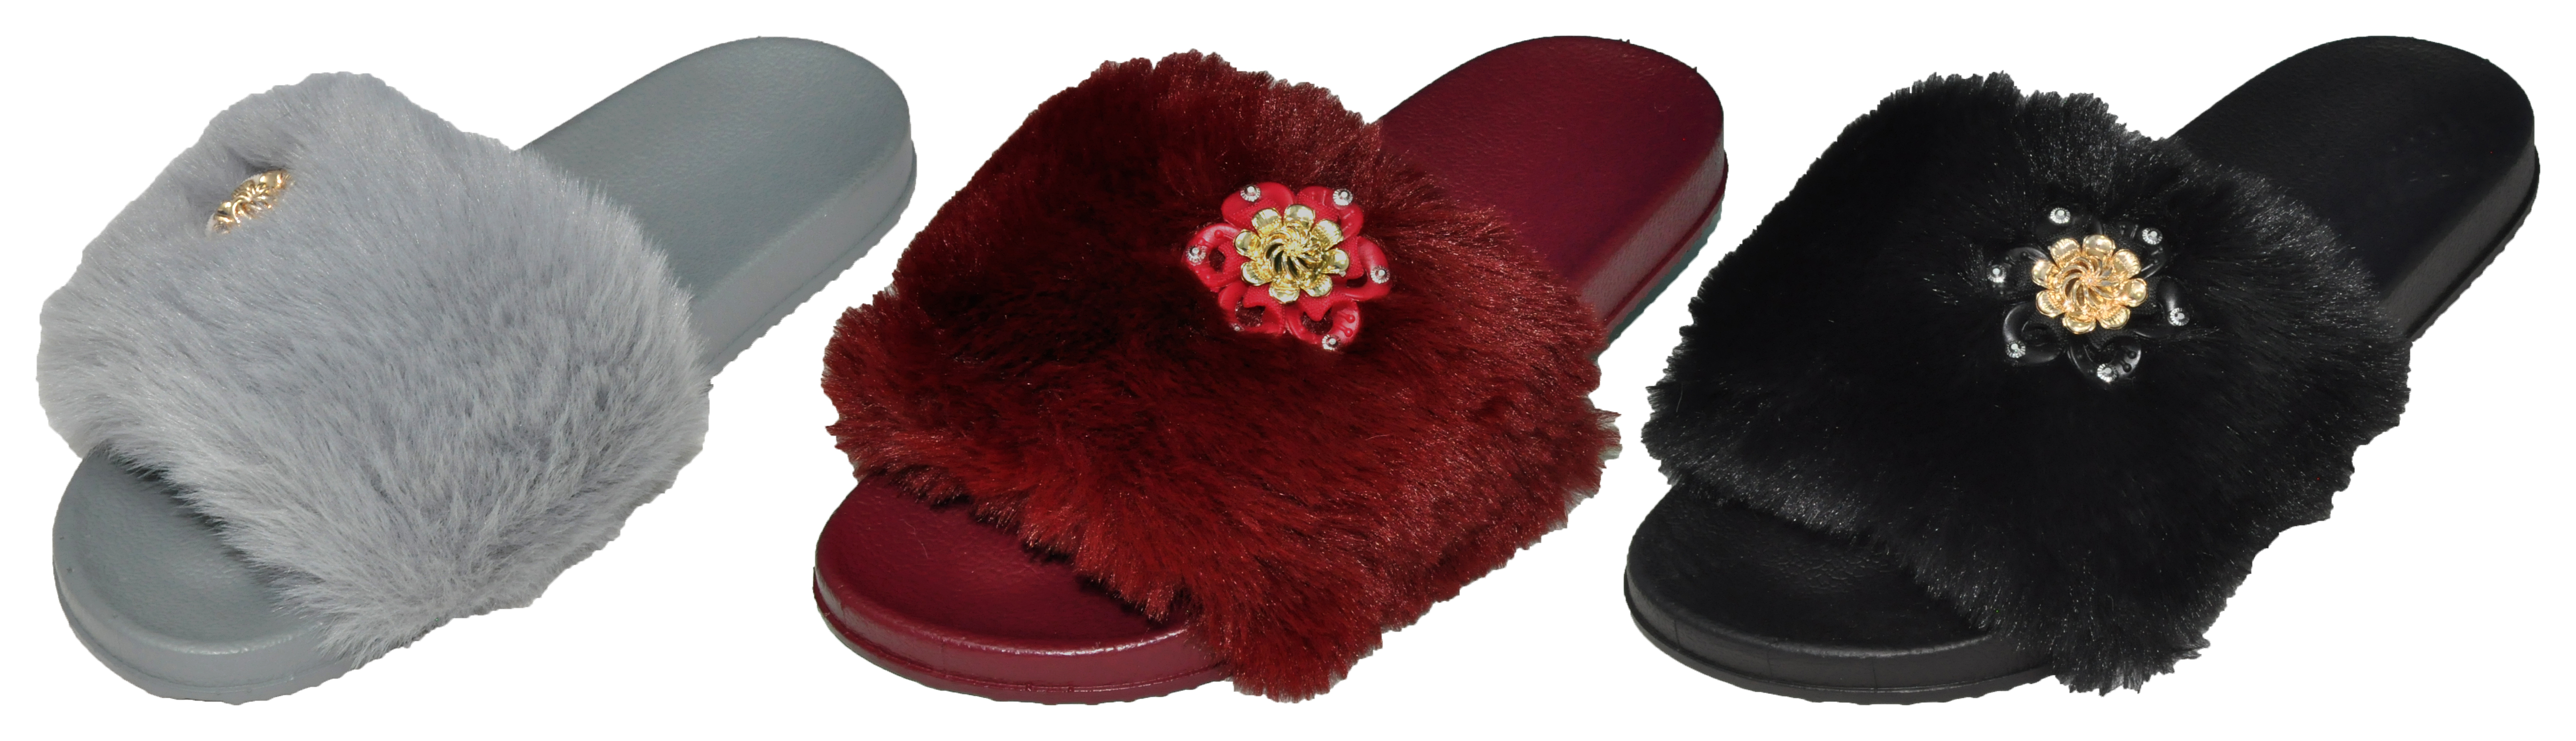 Women's Faux Fur Slide Sandals w/ Embroidered FLOWER Adornment